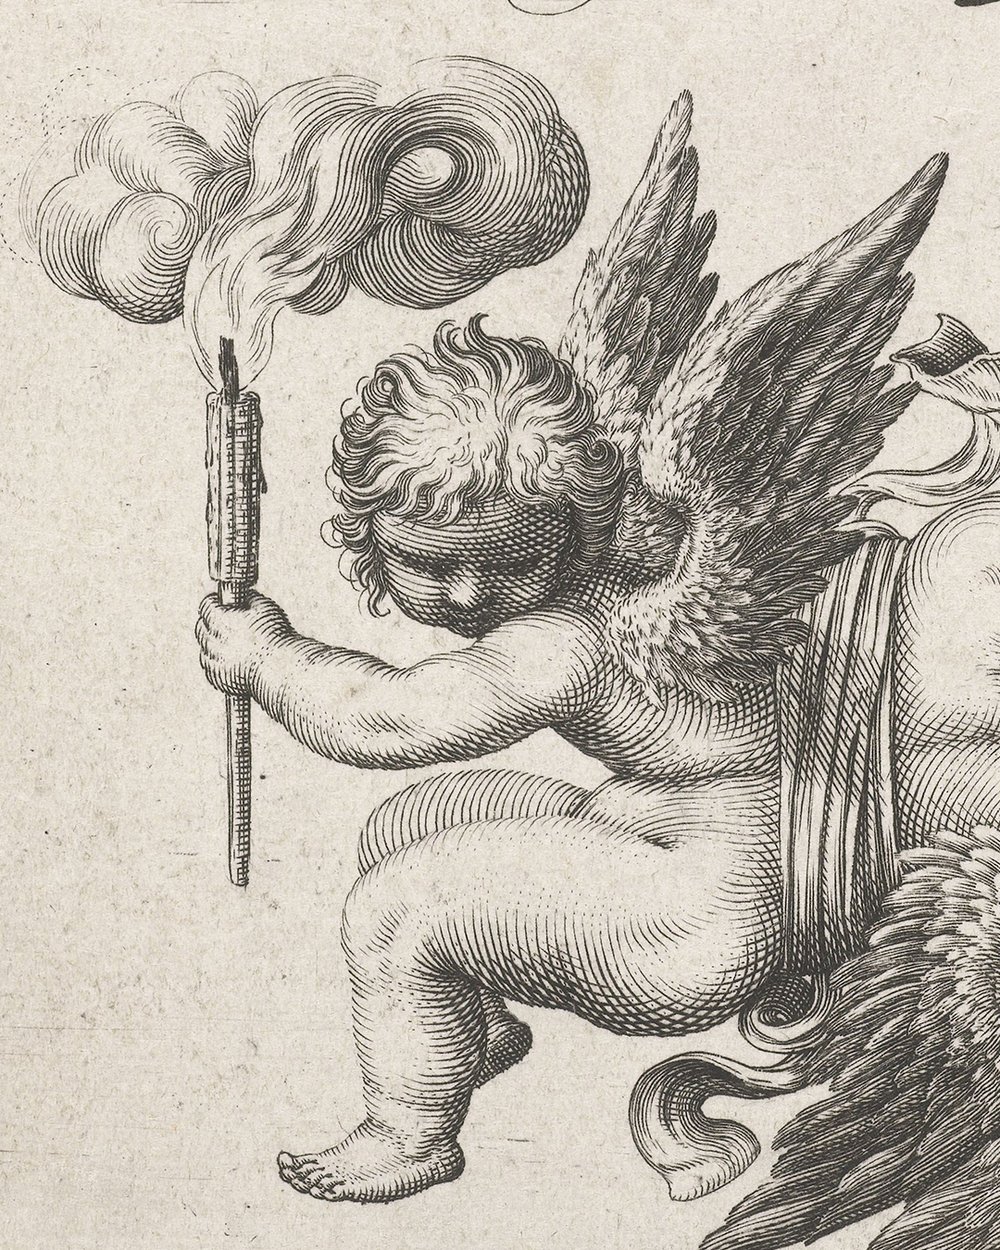 "Two gods of love (Amor) connected by a ribbon" (1590 - 1633)